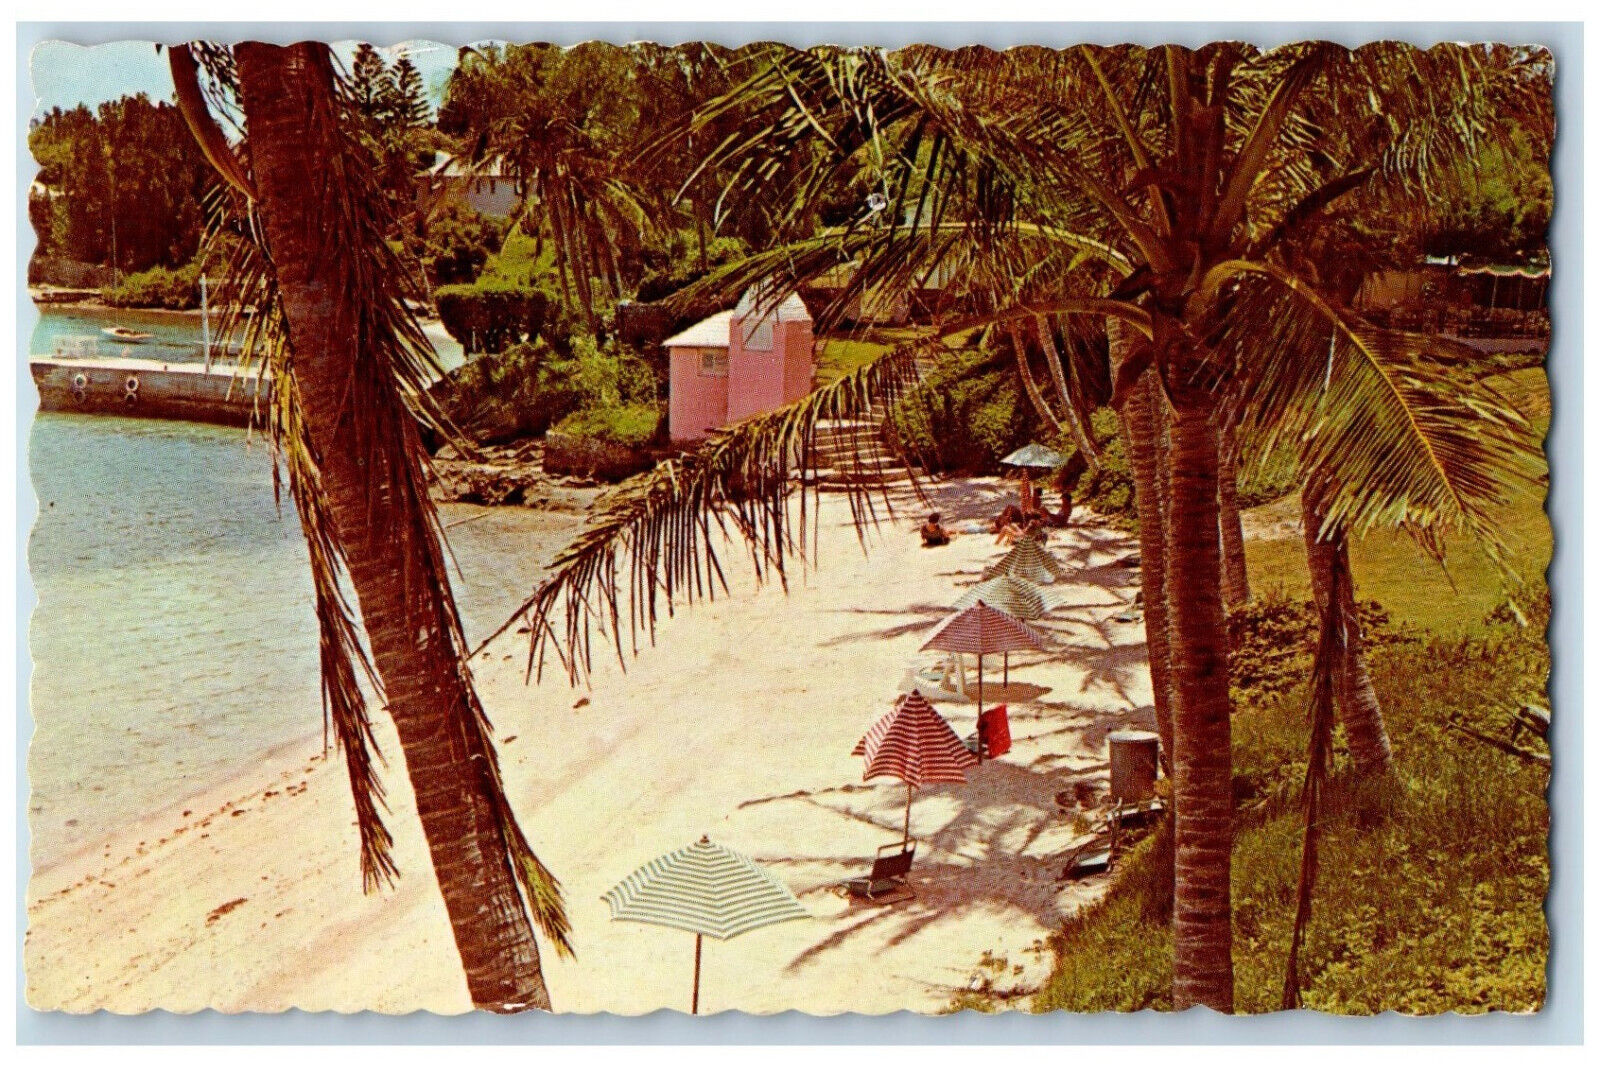 Somerset Bermuda Postcard The Beach at Cambridge Beaches 1970 Vintage Posted